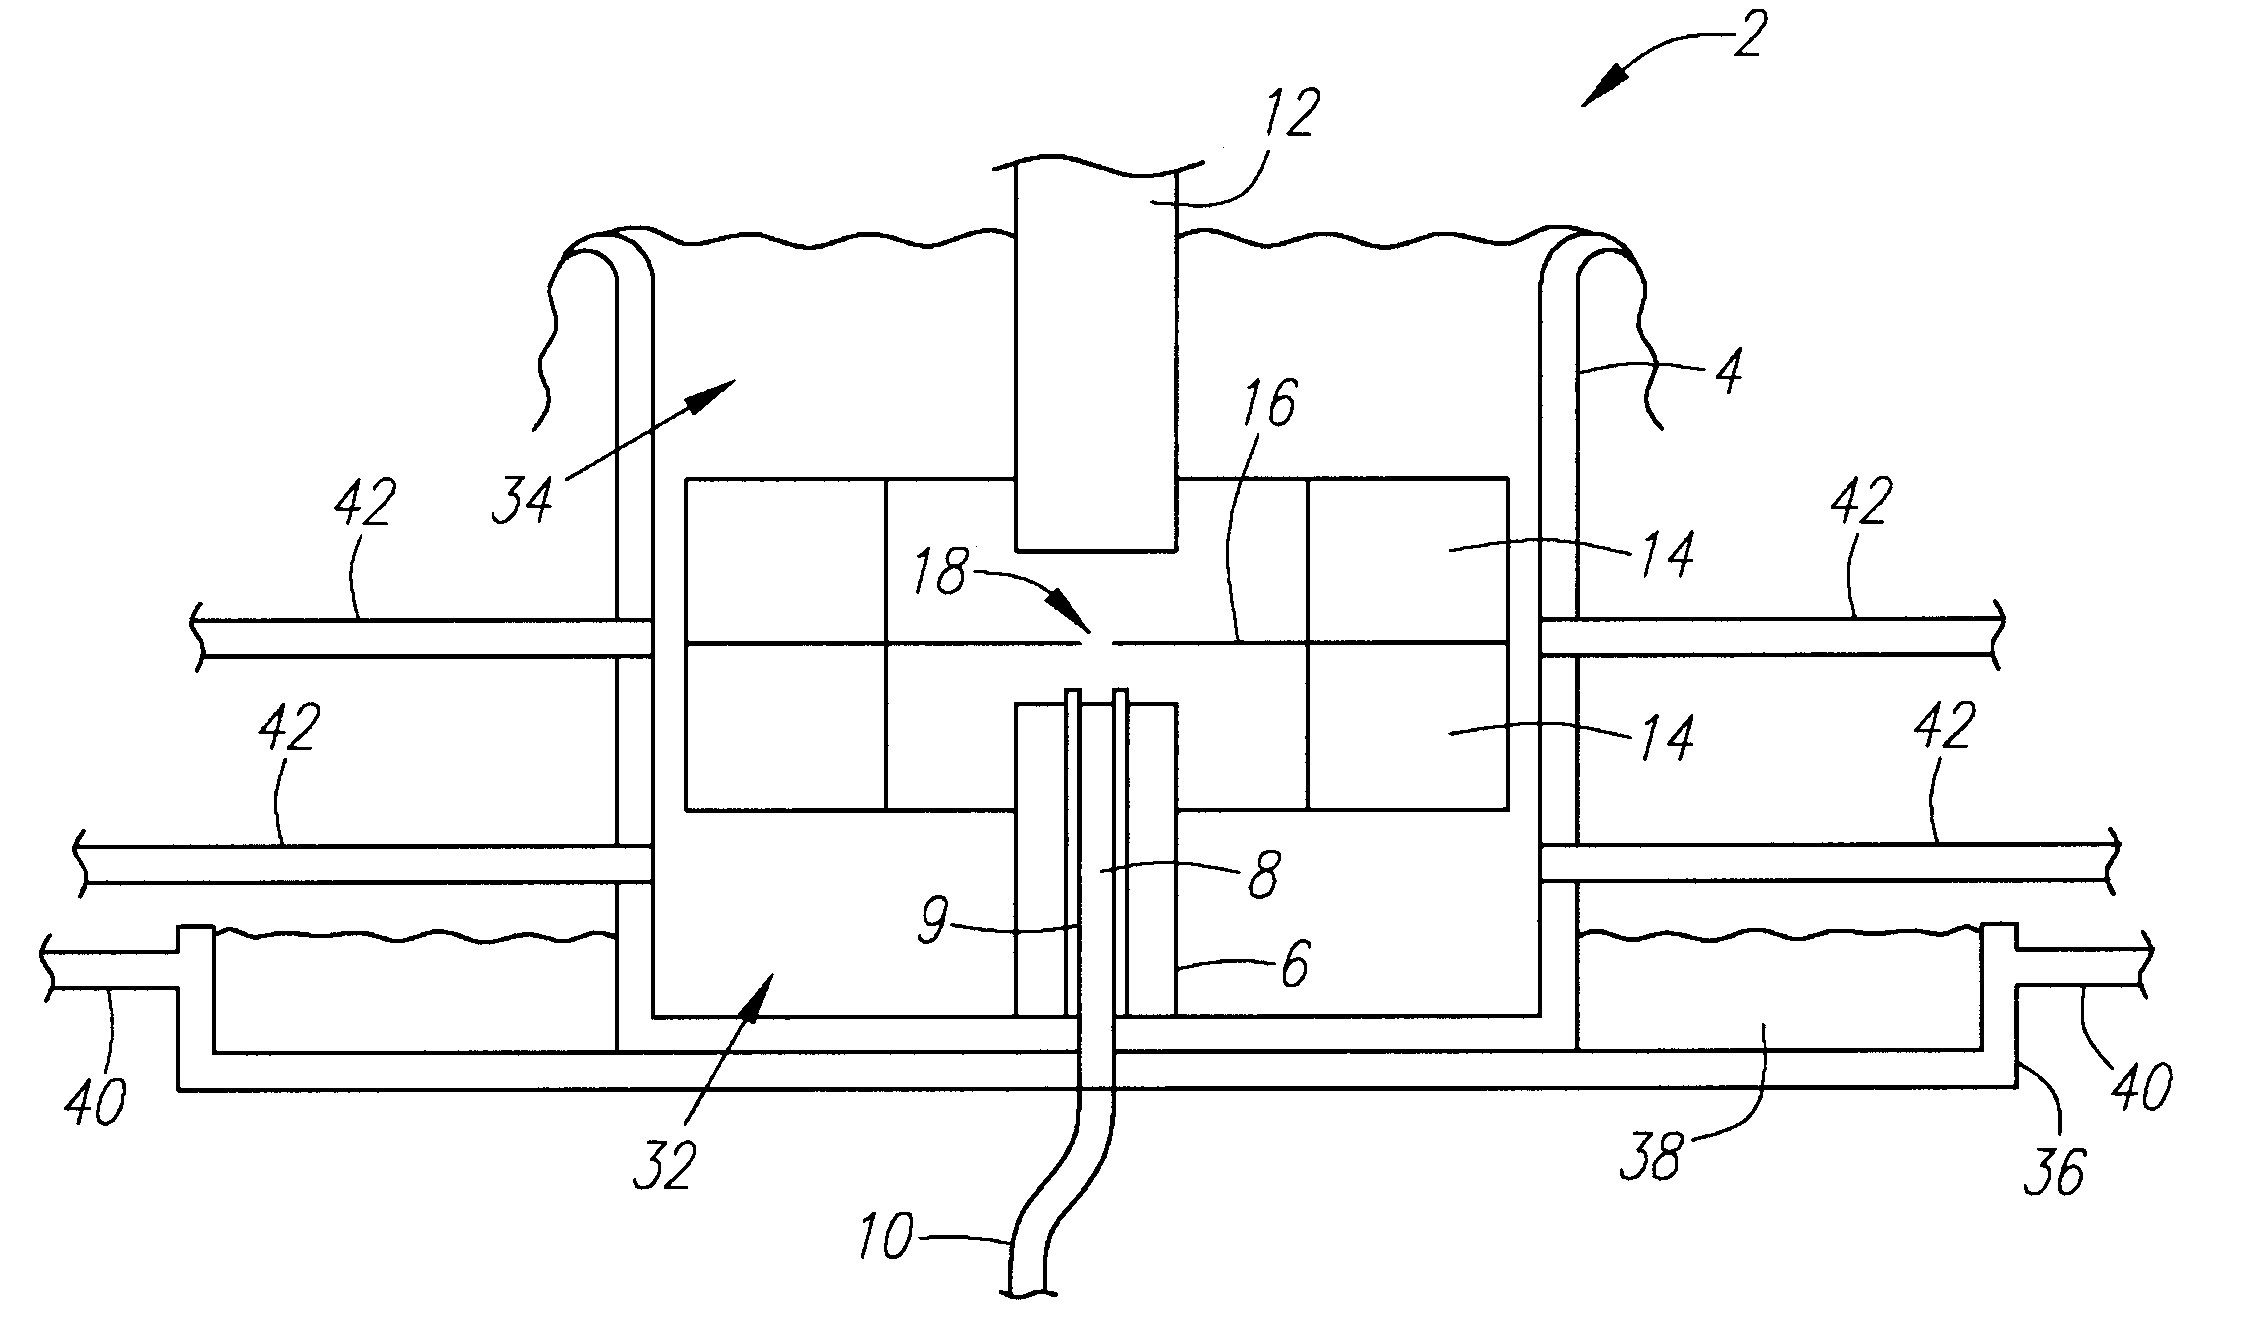 Apparatus and method for magneto-electrodynamic separation of ions within an electrolytic fluid